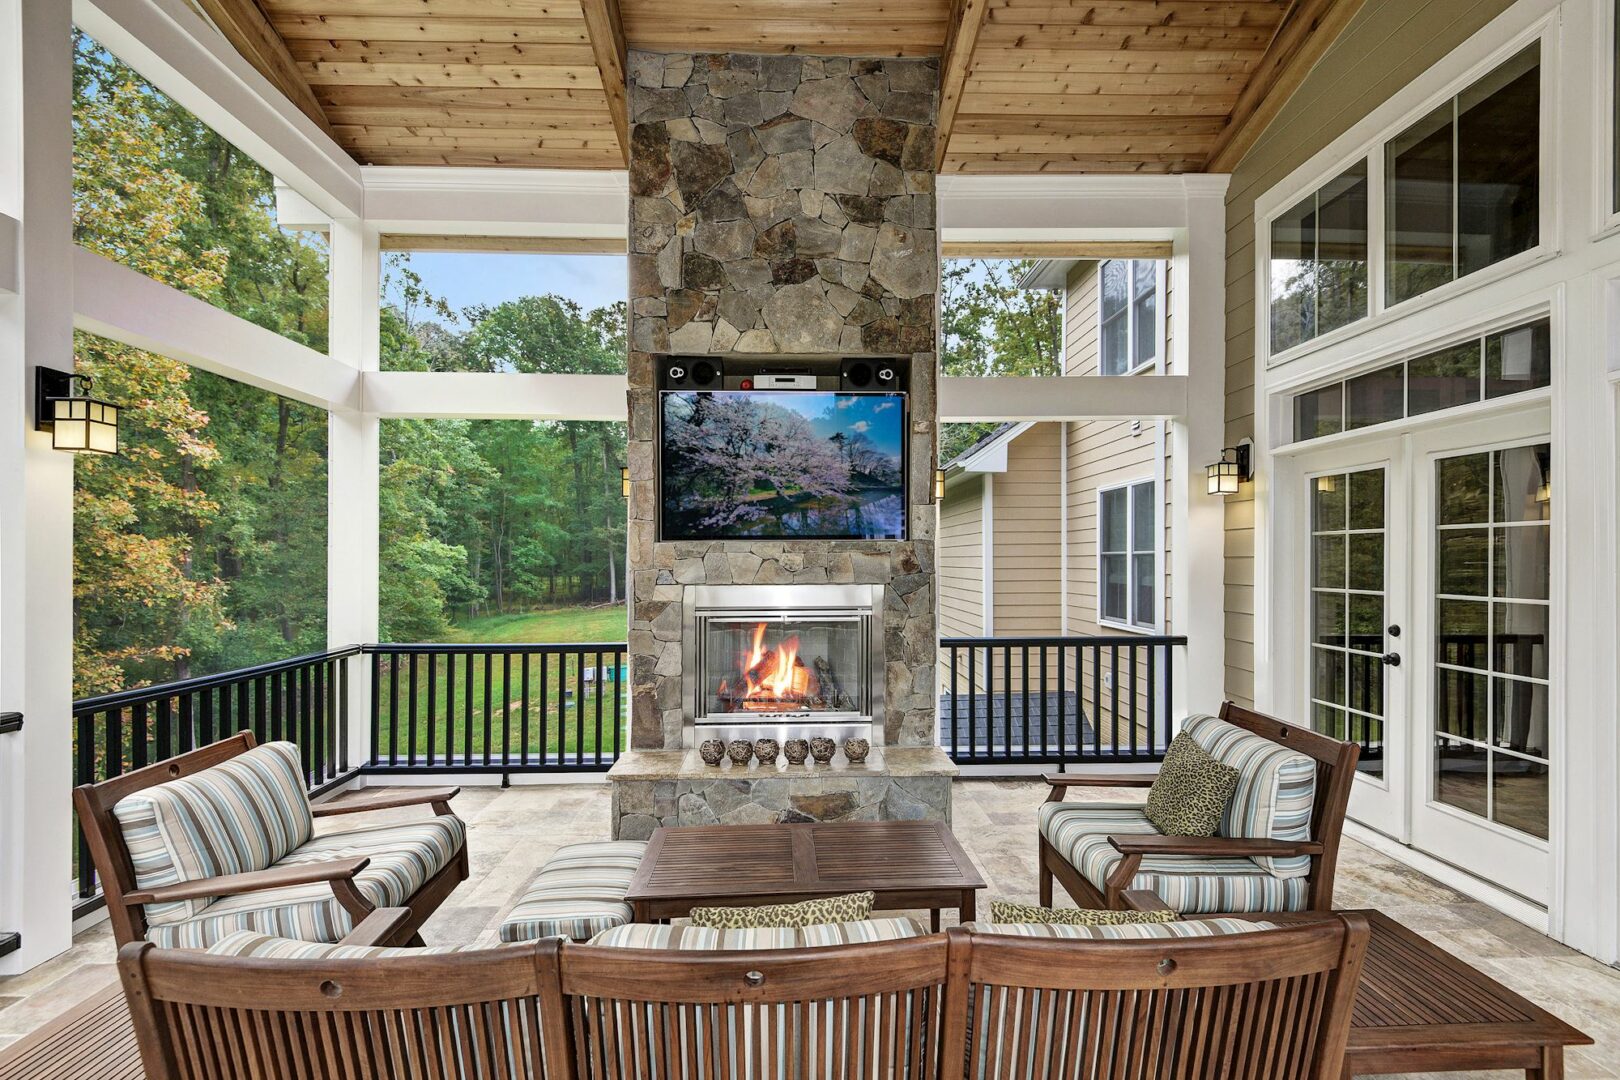 Interior of home addition with outdoor seating and fireplace